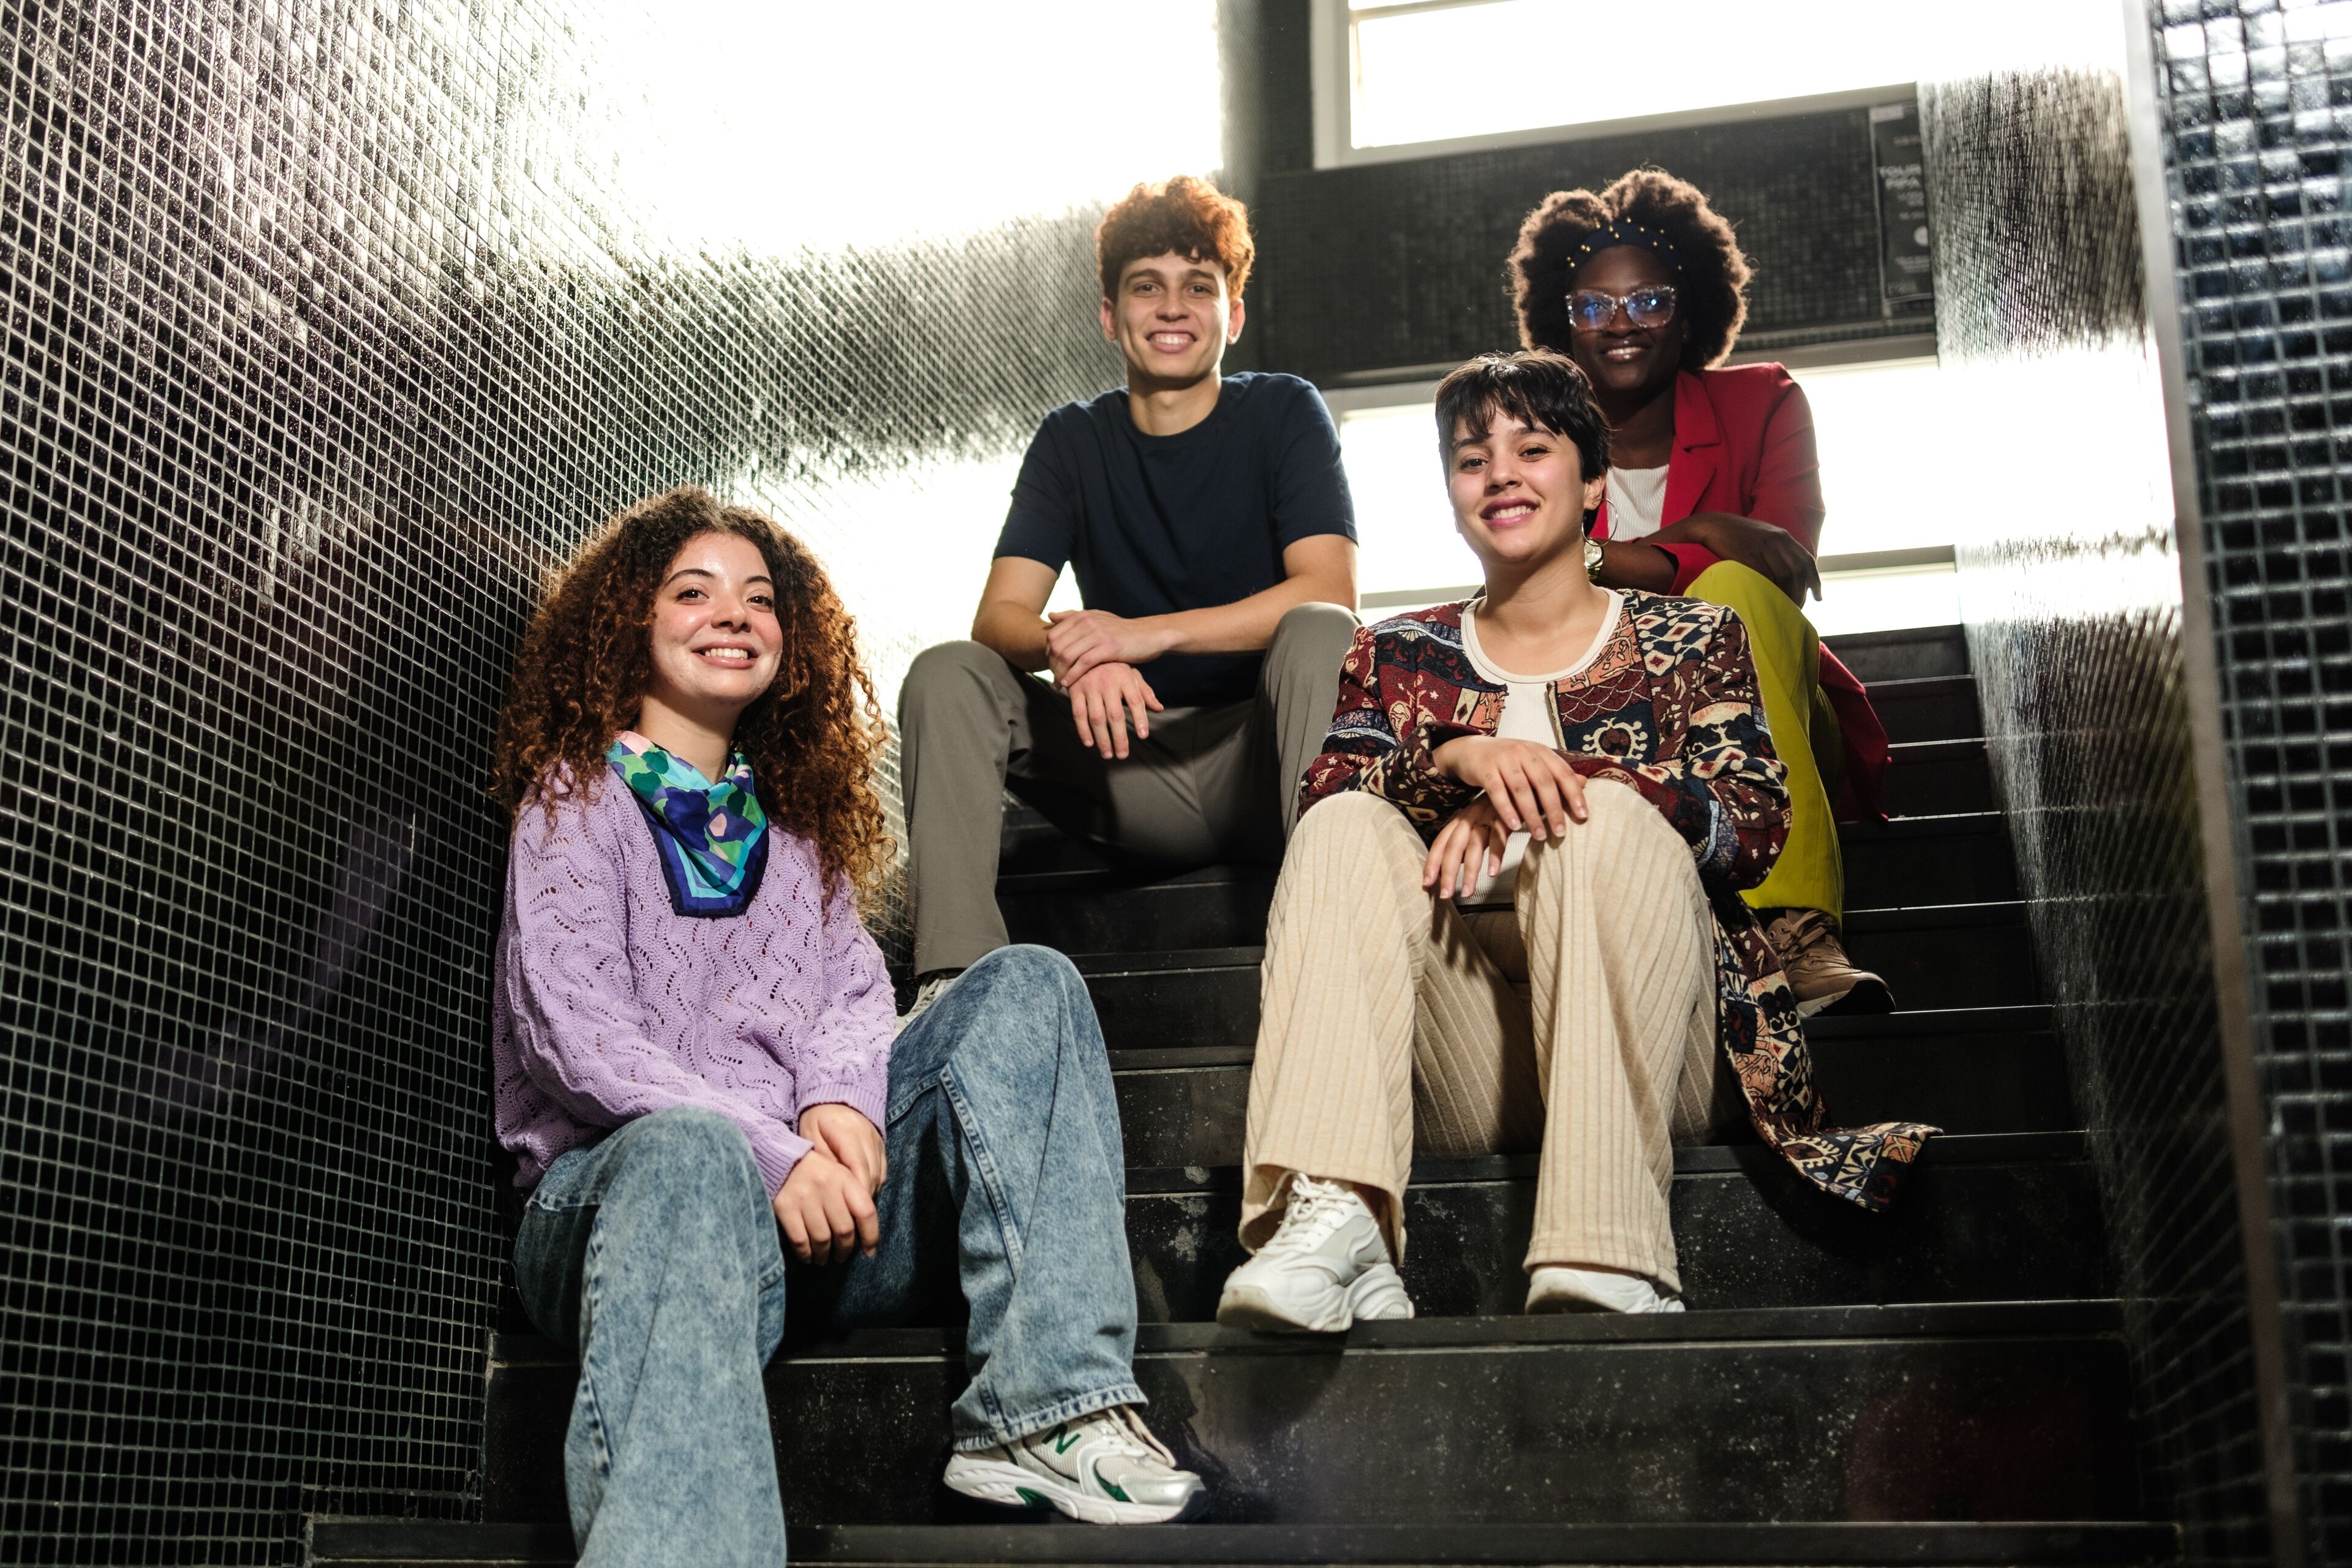 Four young adults, two women in the front and a man and a woman behind, are sitting on dark stairs, smiling and posing for a photo. They are casually dressed, showcasing individual styles.